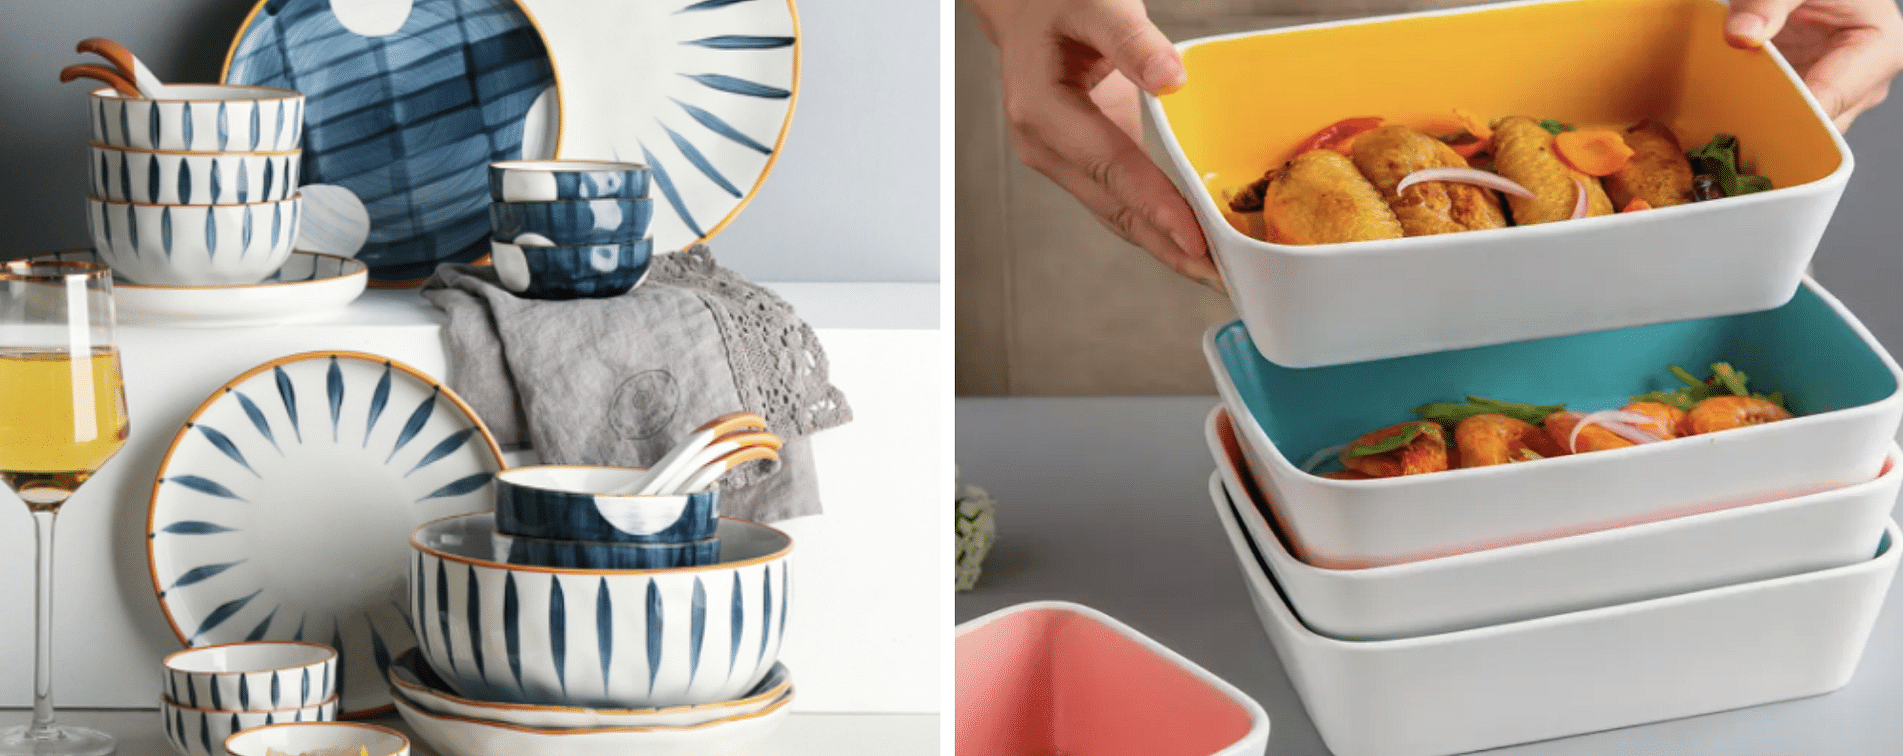 10 Kitchen Christmas Gift Ideas for the home chef and baker